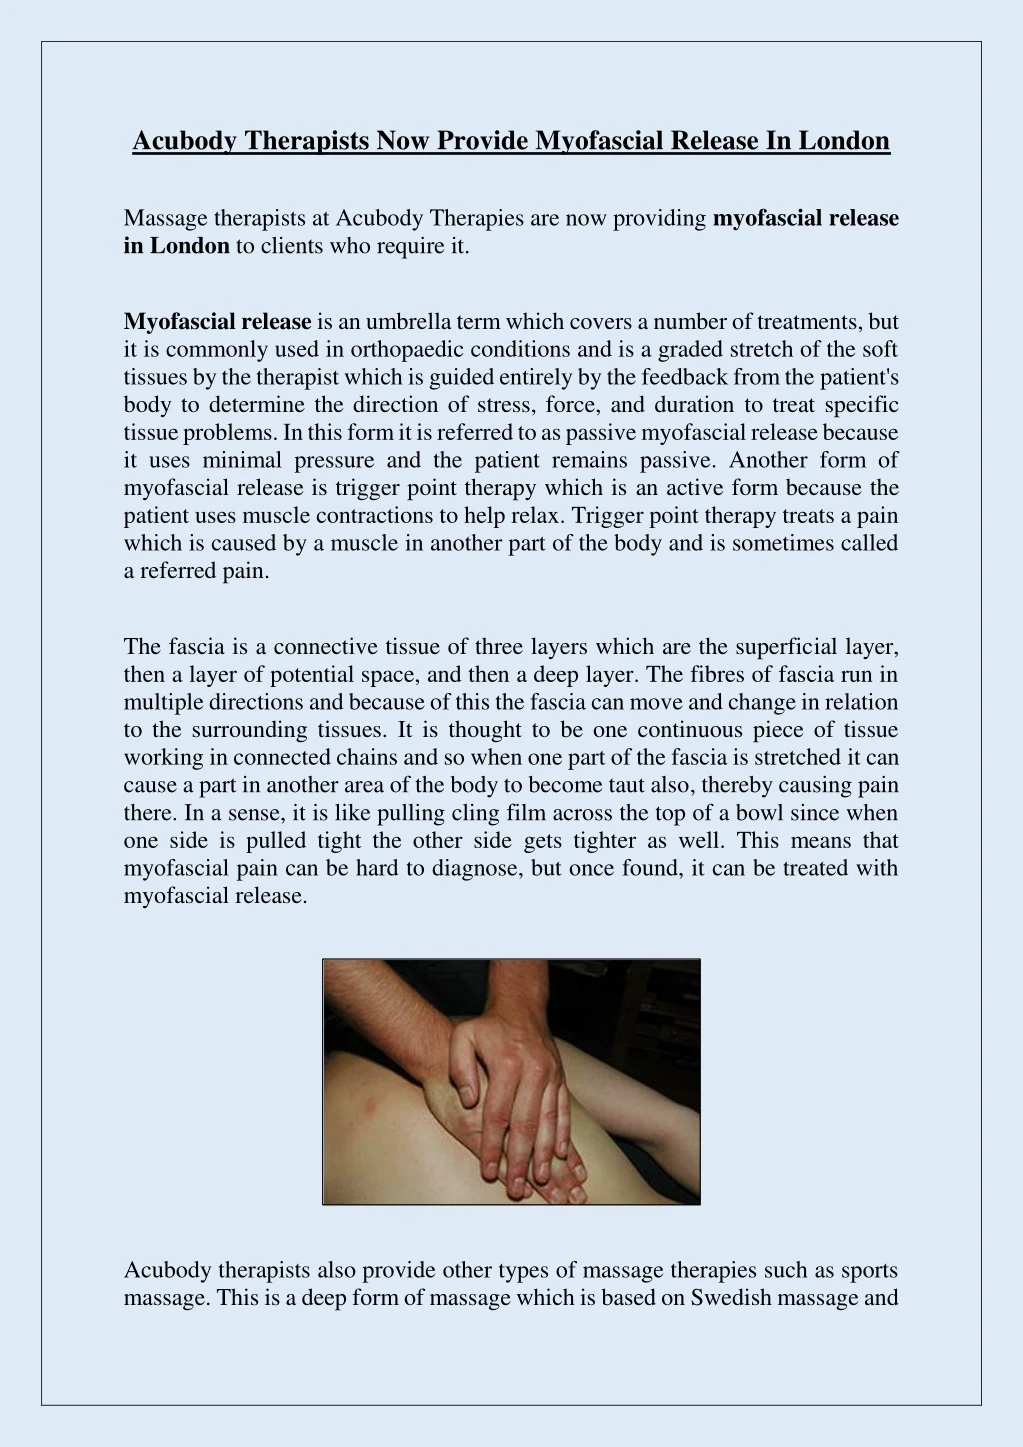 acubody therapists now provide myofascial release